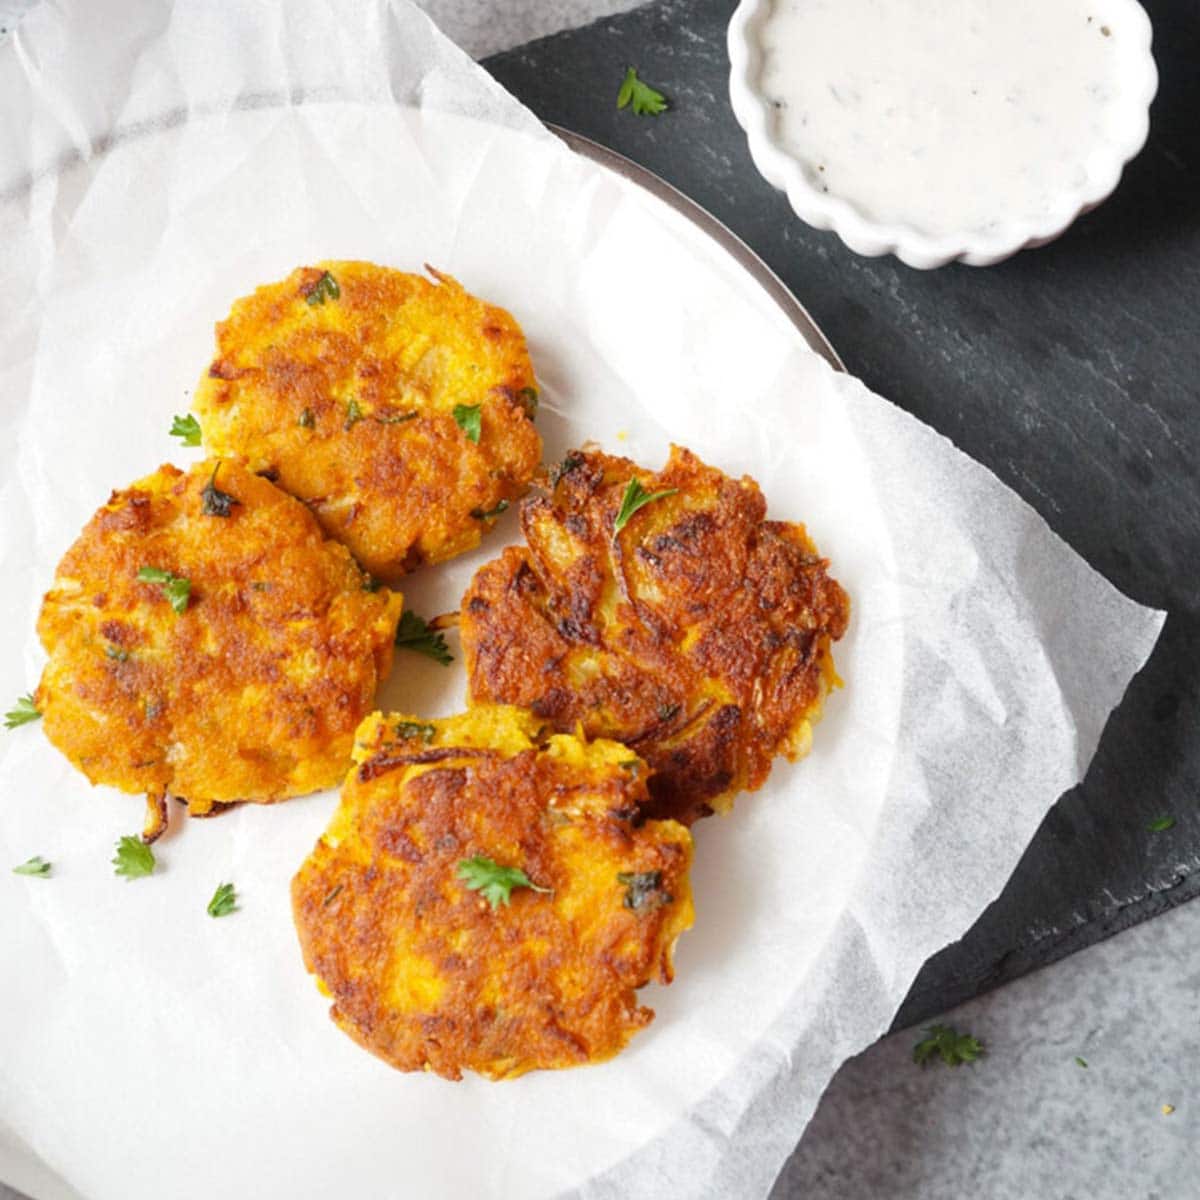 Vegan Chickpea Squash Fritters in a plate with yogurt dip on the side